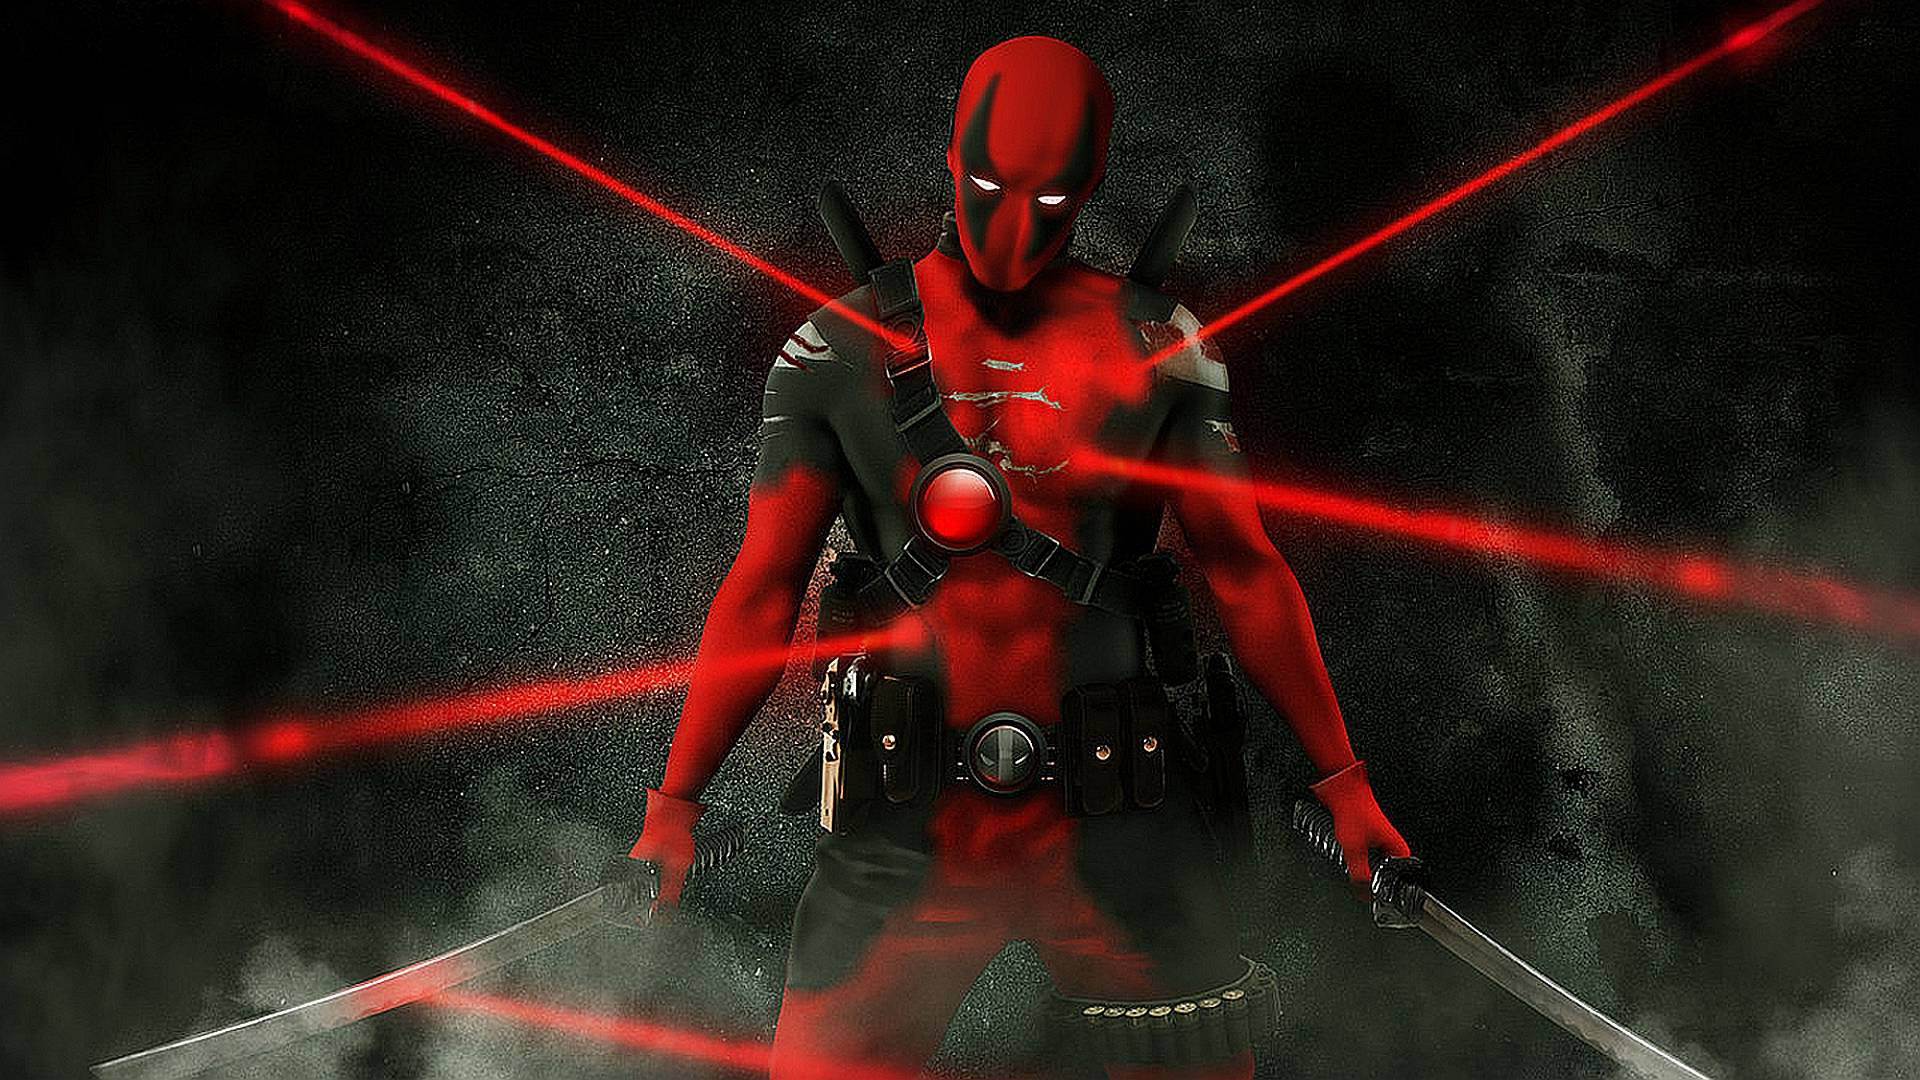  November 9 2015 By Stephen Comments Off on Deadpool Movie Wallpaper 1920x1080